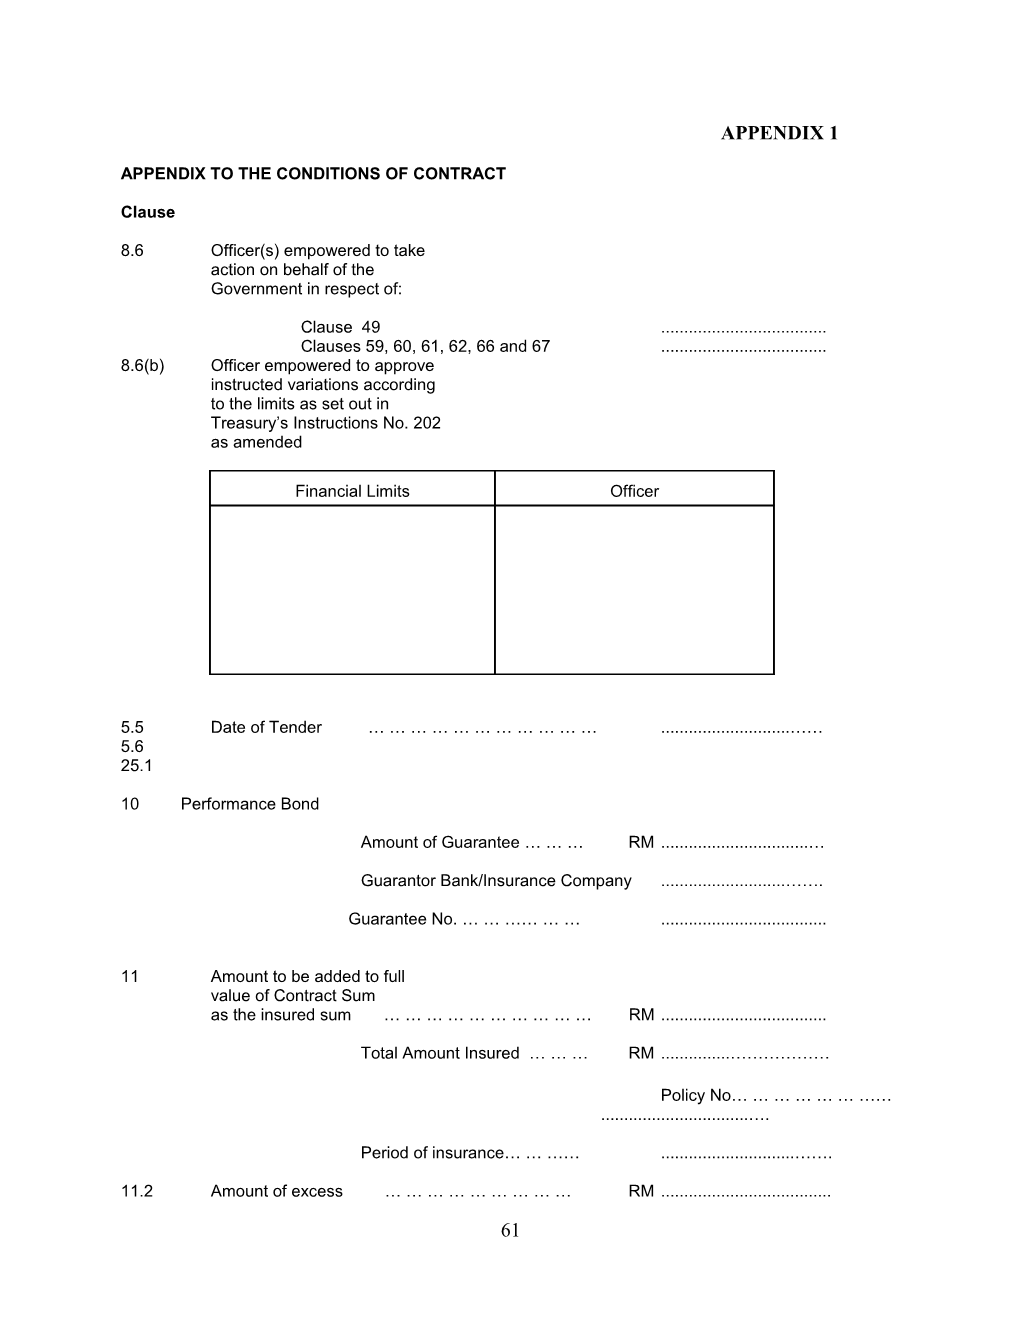 Appendix to the Conditions of Contract